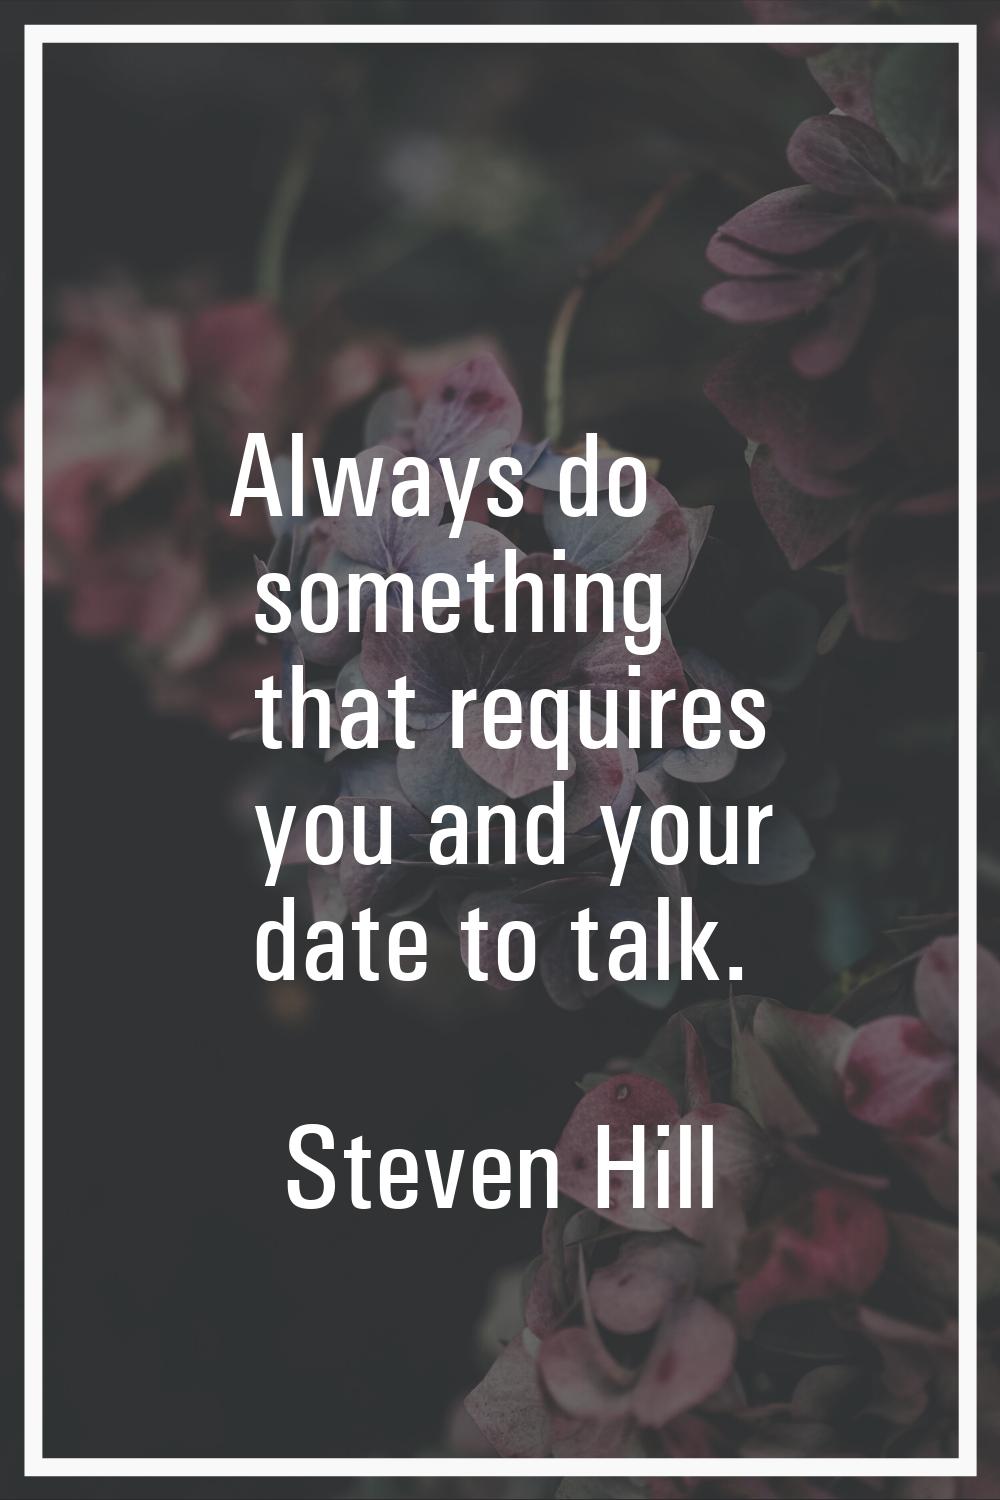 Always do something that requires you and your date to talk.